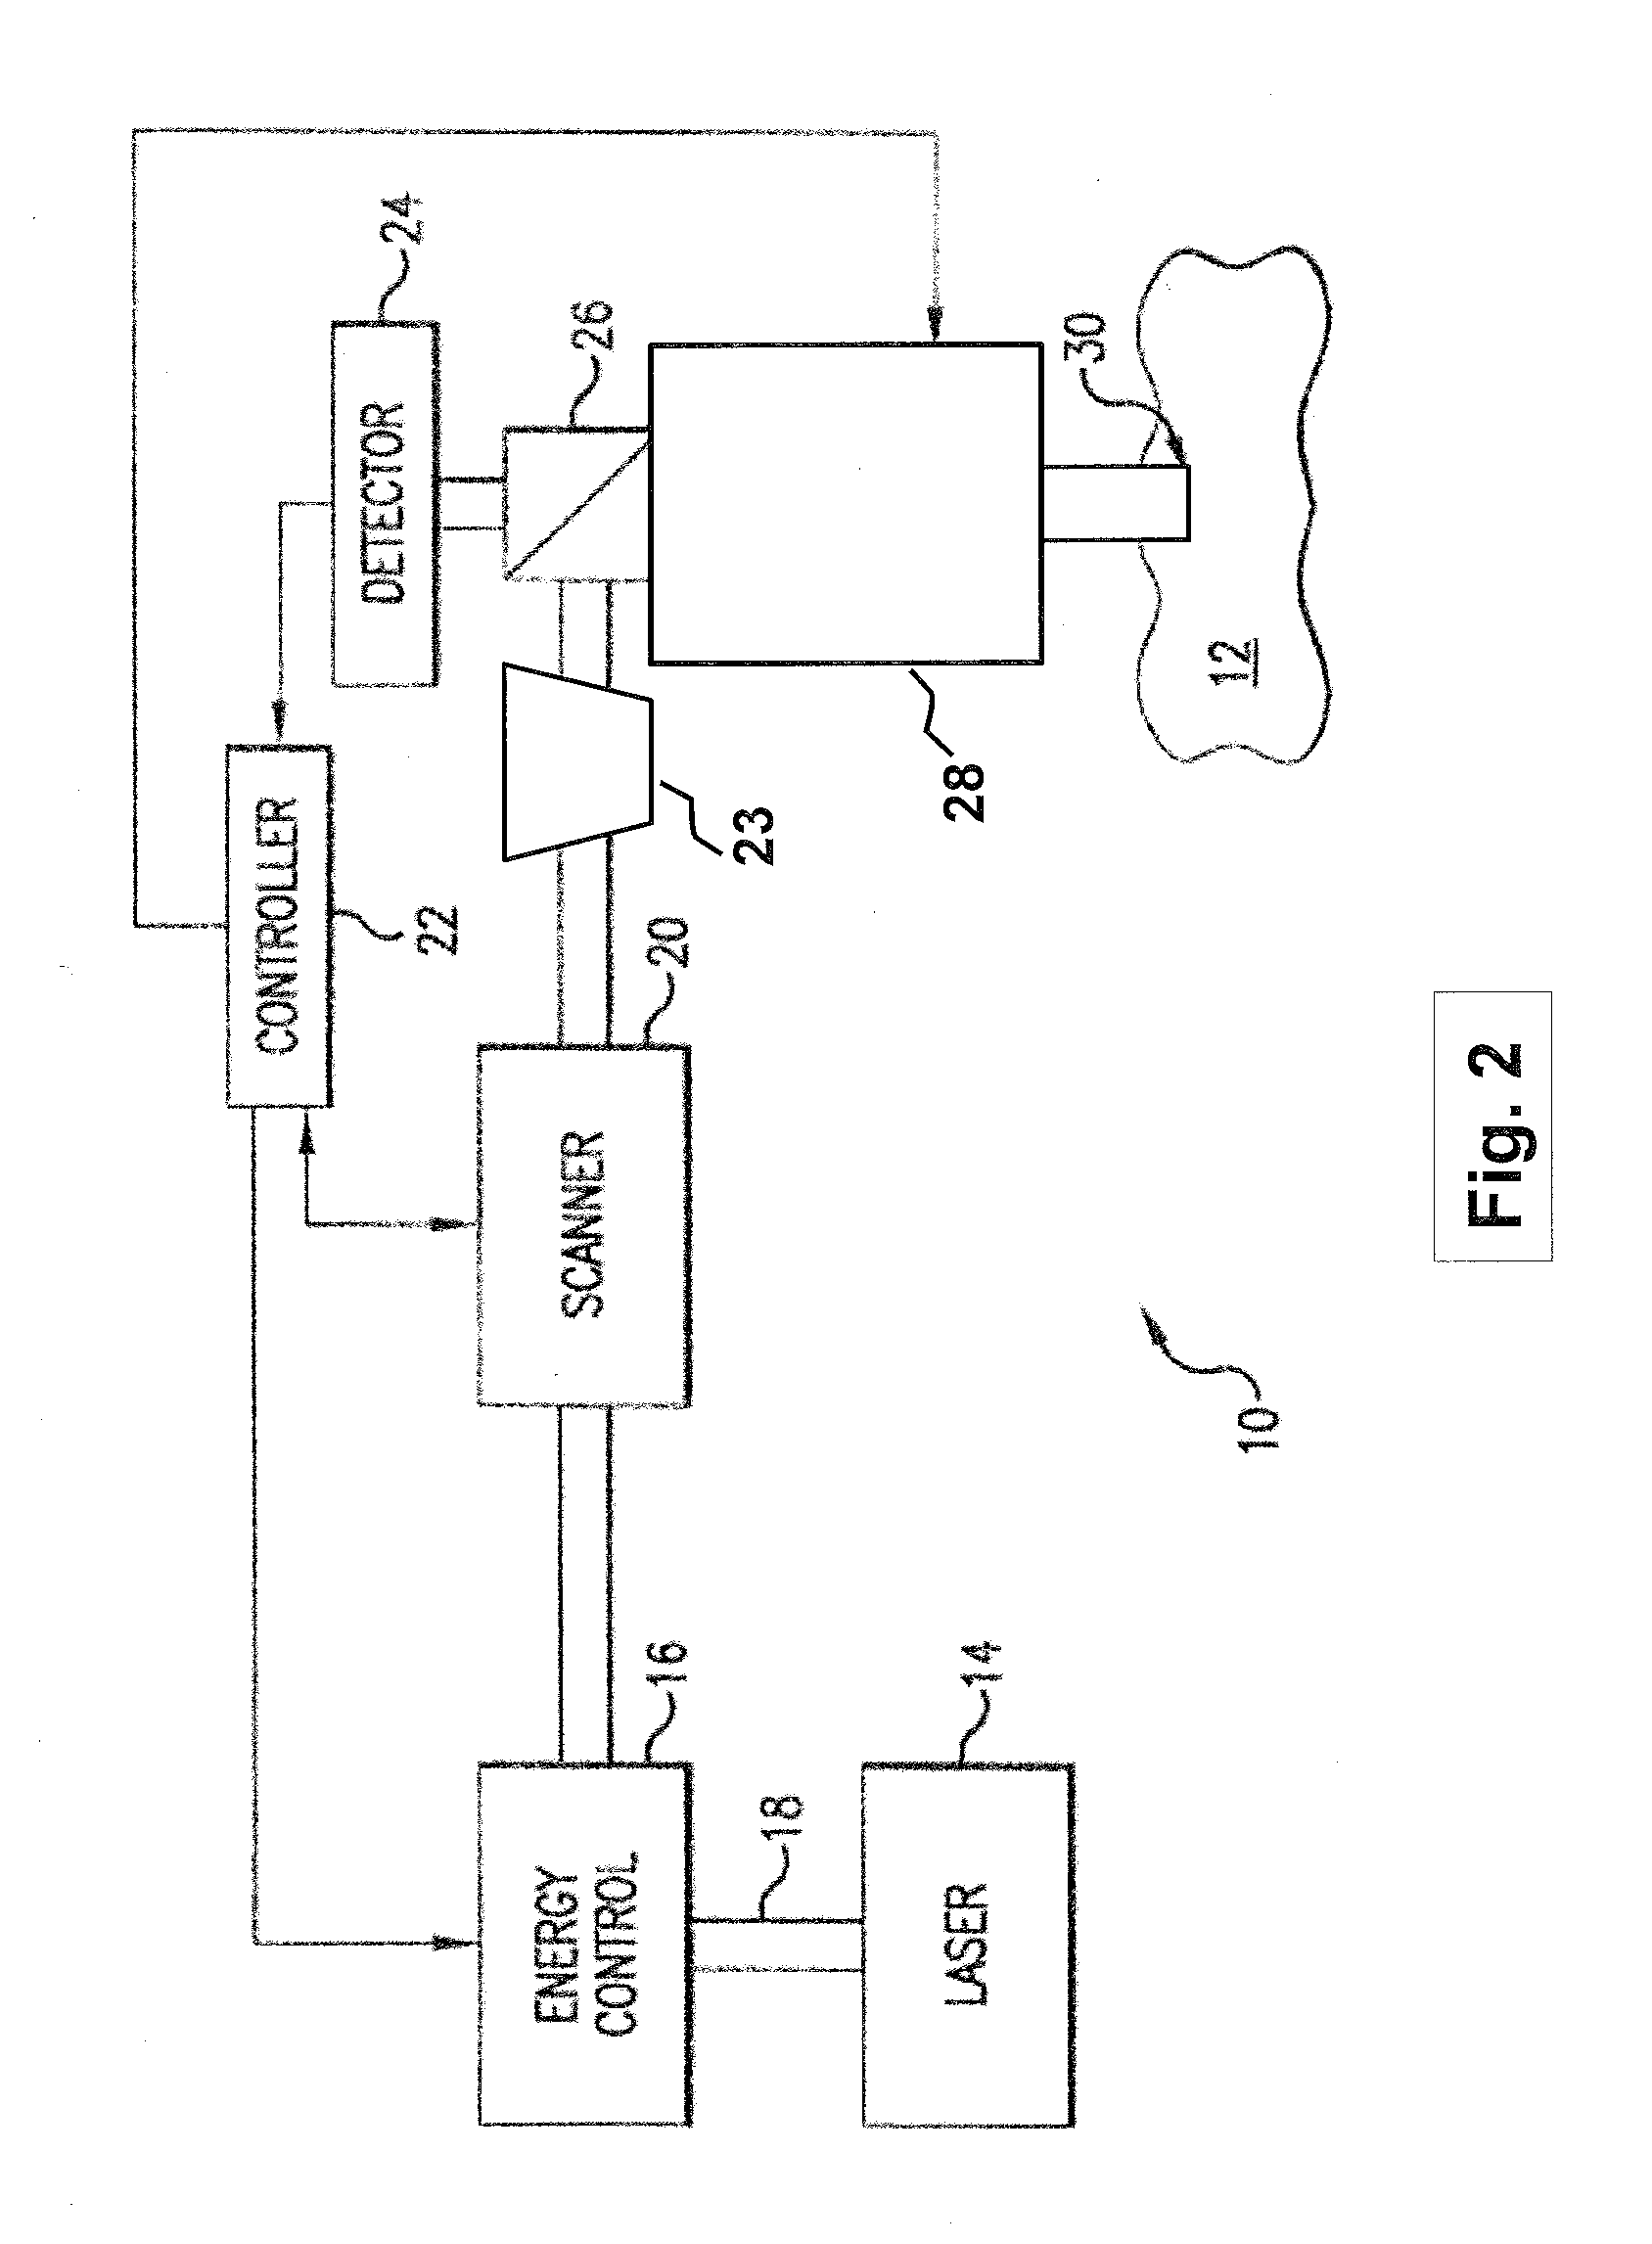 Systems and methods for lenticular laser incision